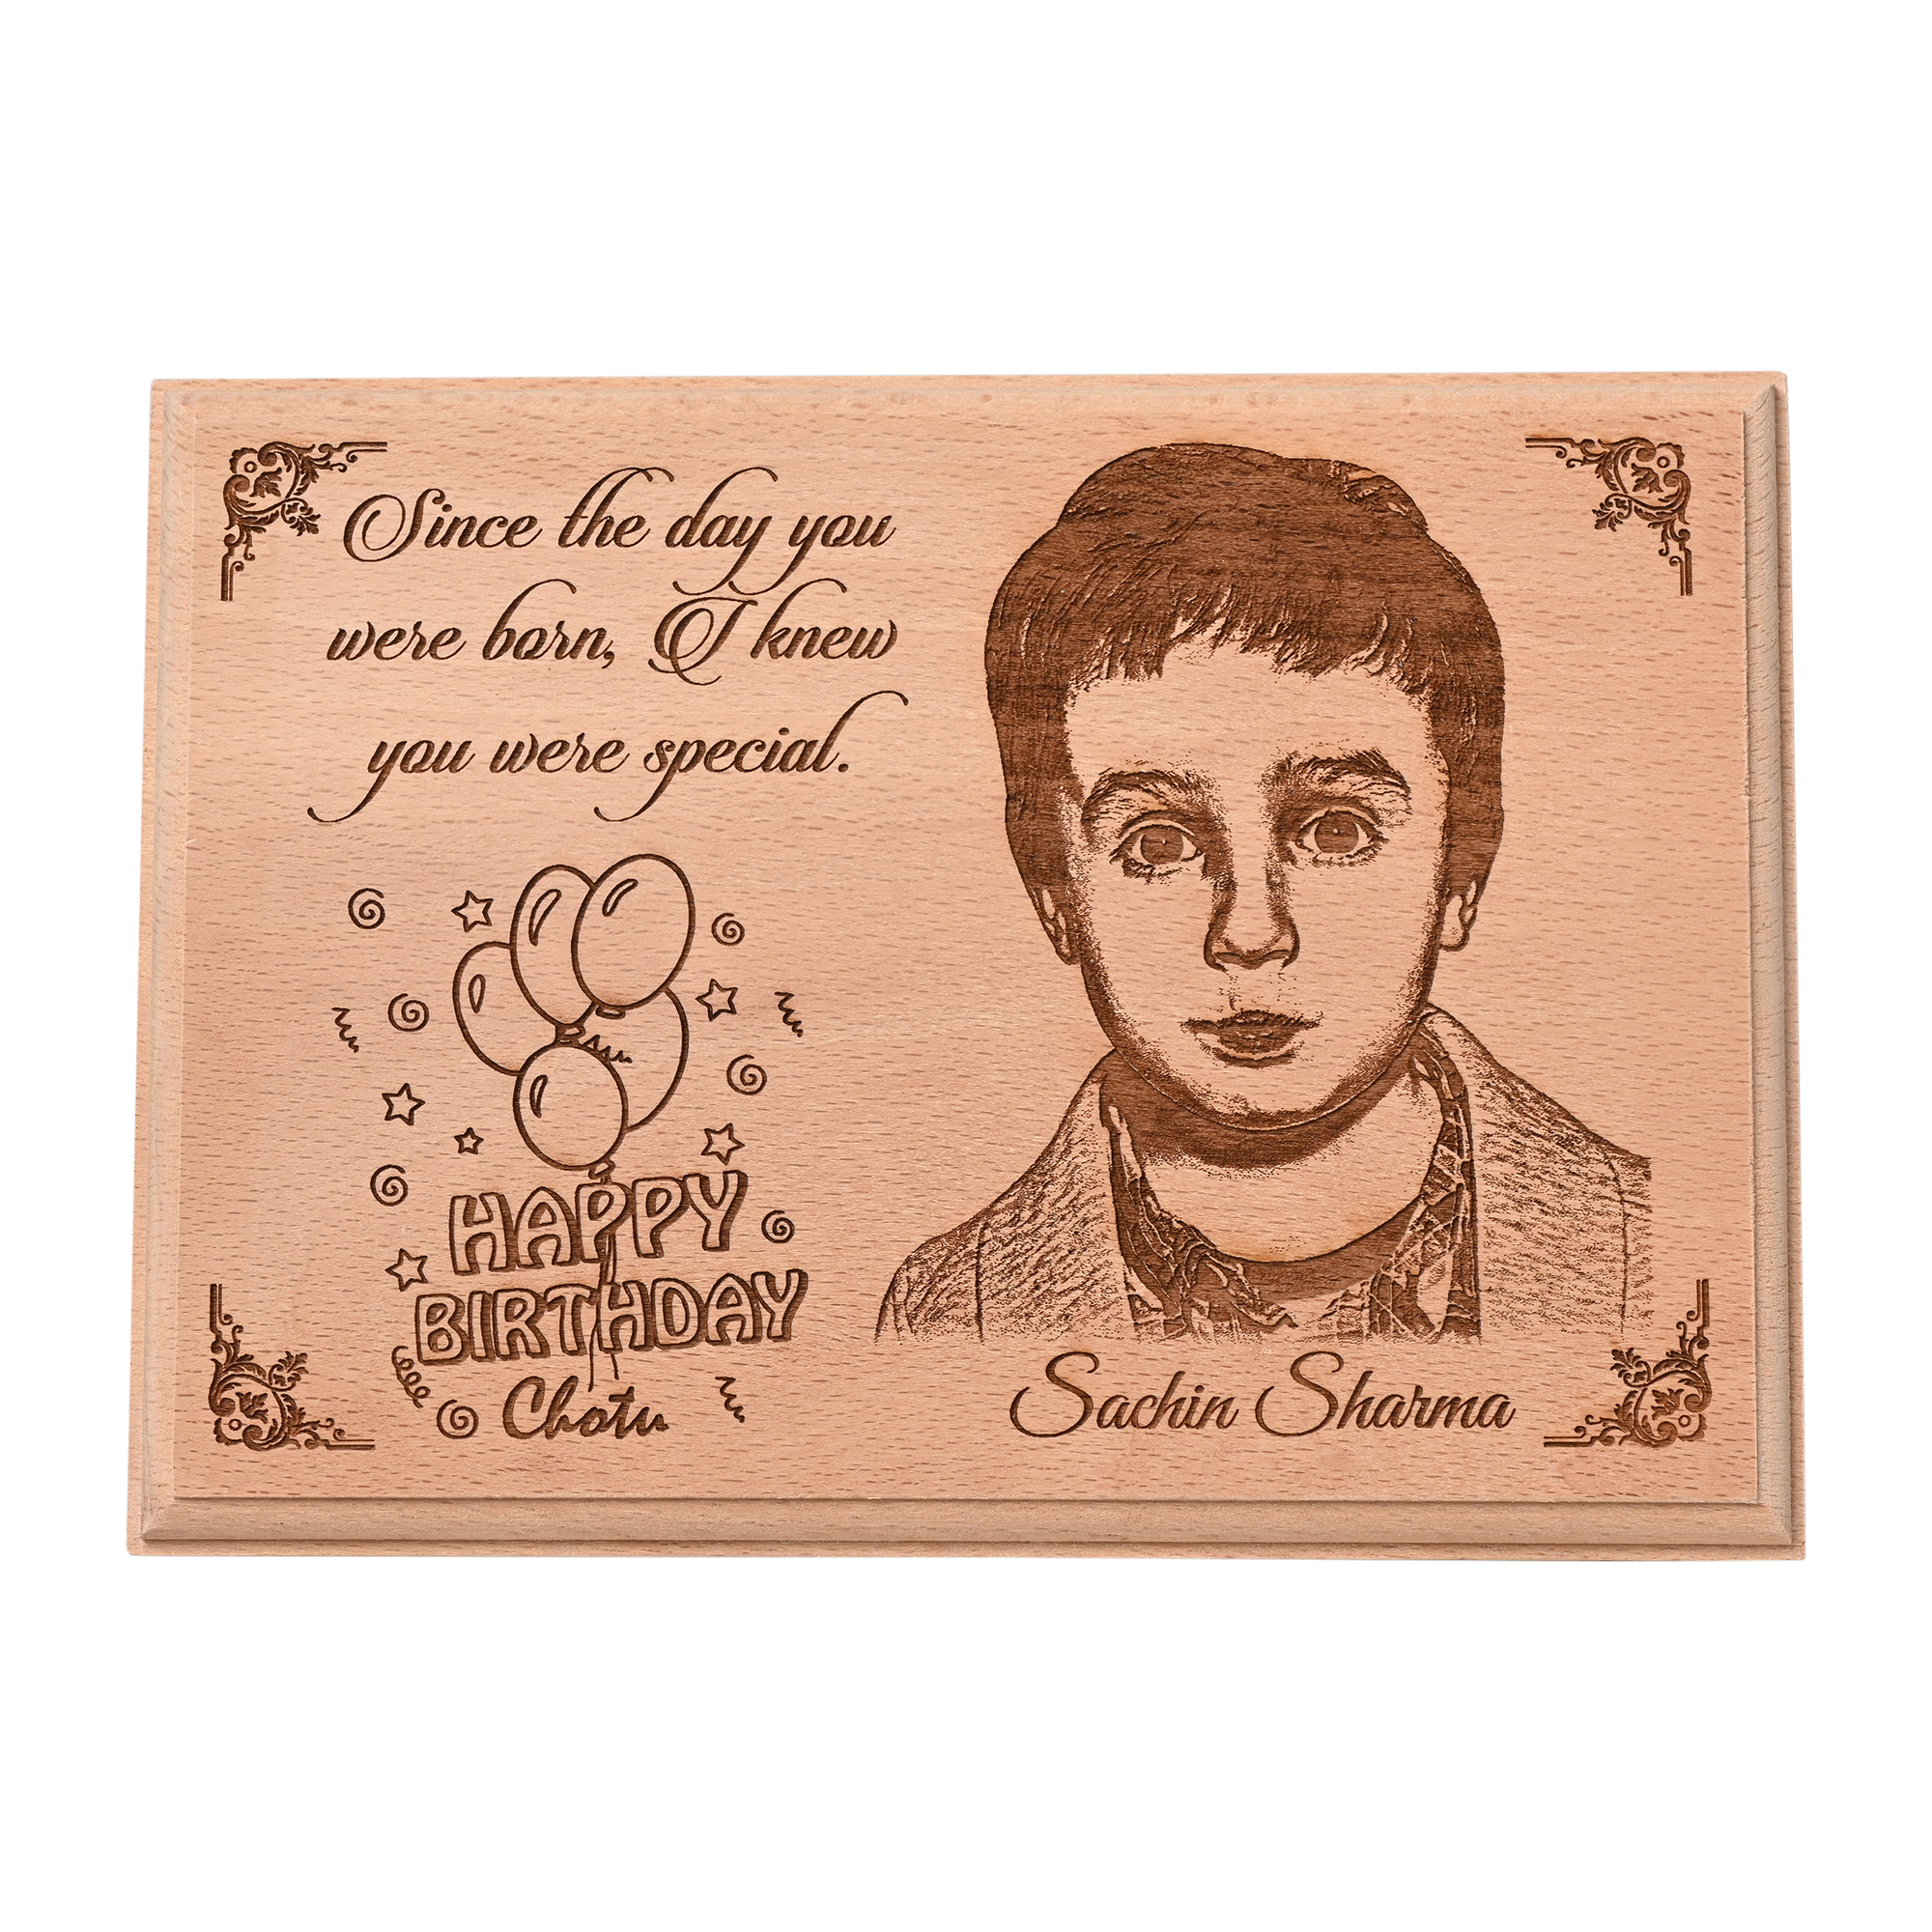 Giftanna Gifts for Kids Birthday : Engraved Wooden Photo Plaques 